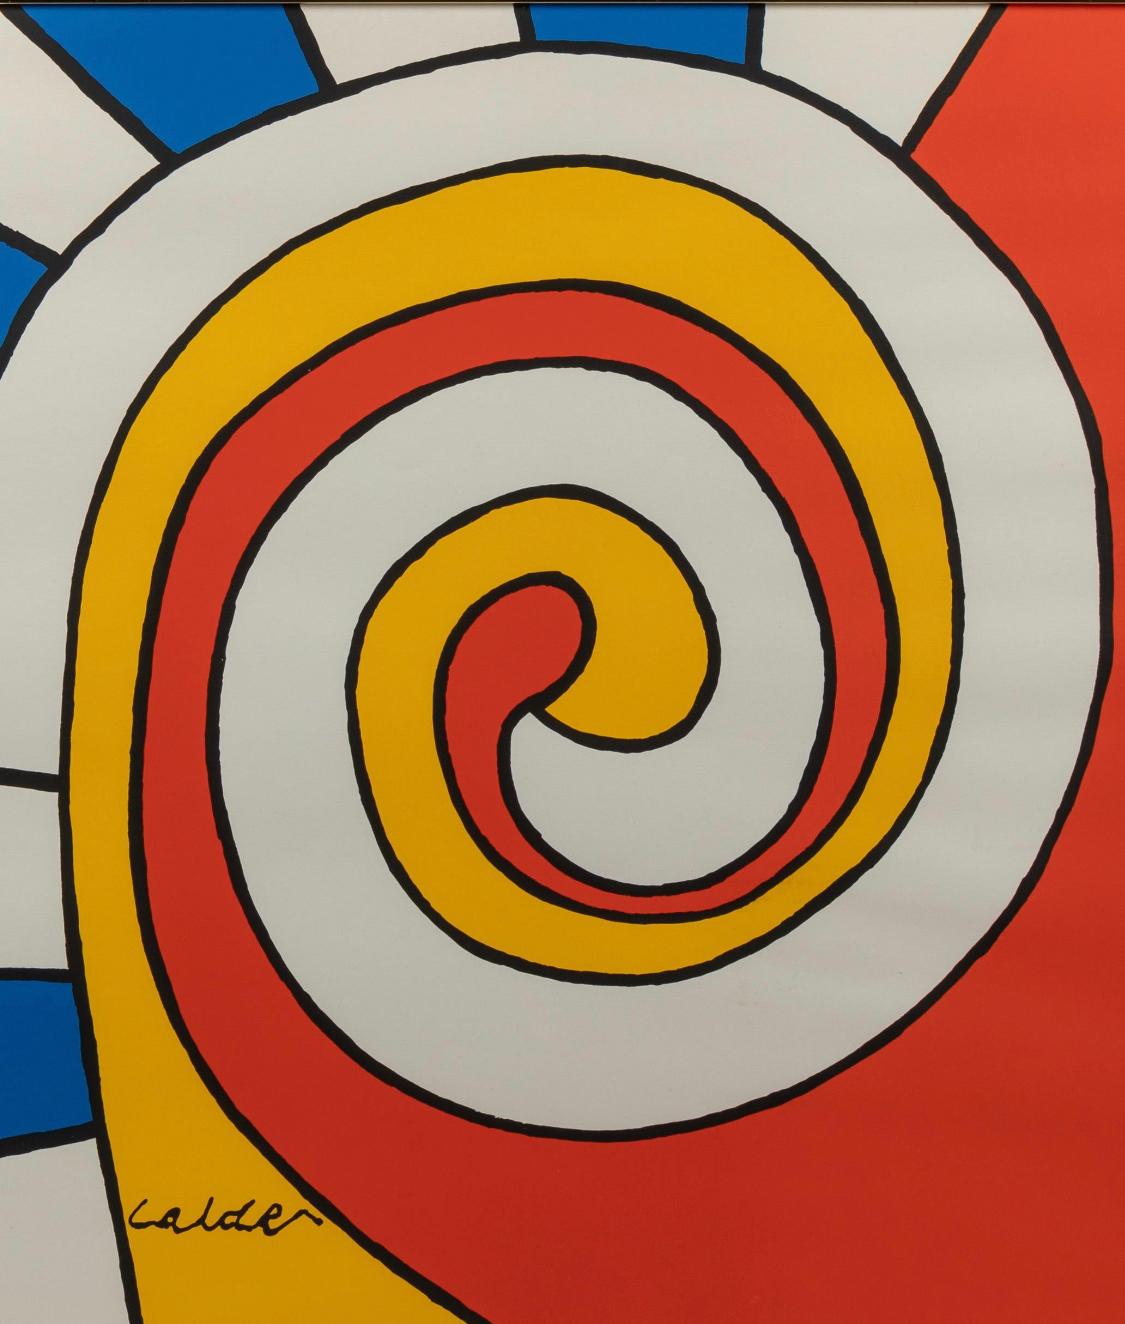 Framed vintage exhibition poster by Alexander Calder. The exhibit was entitled: Homage to Calder, and held at the Jerusalem Museum in Israel. The image features the Classic primary color composition with spiral image and blue and white stripes in